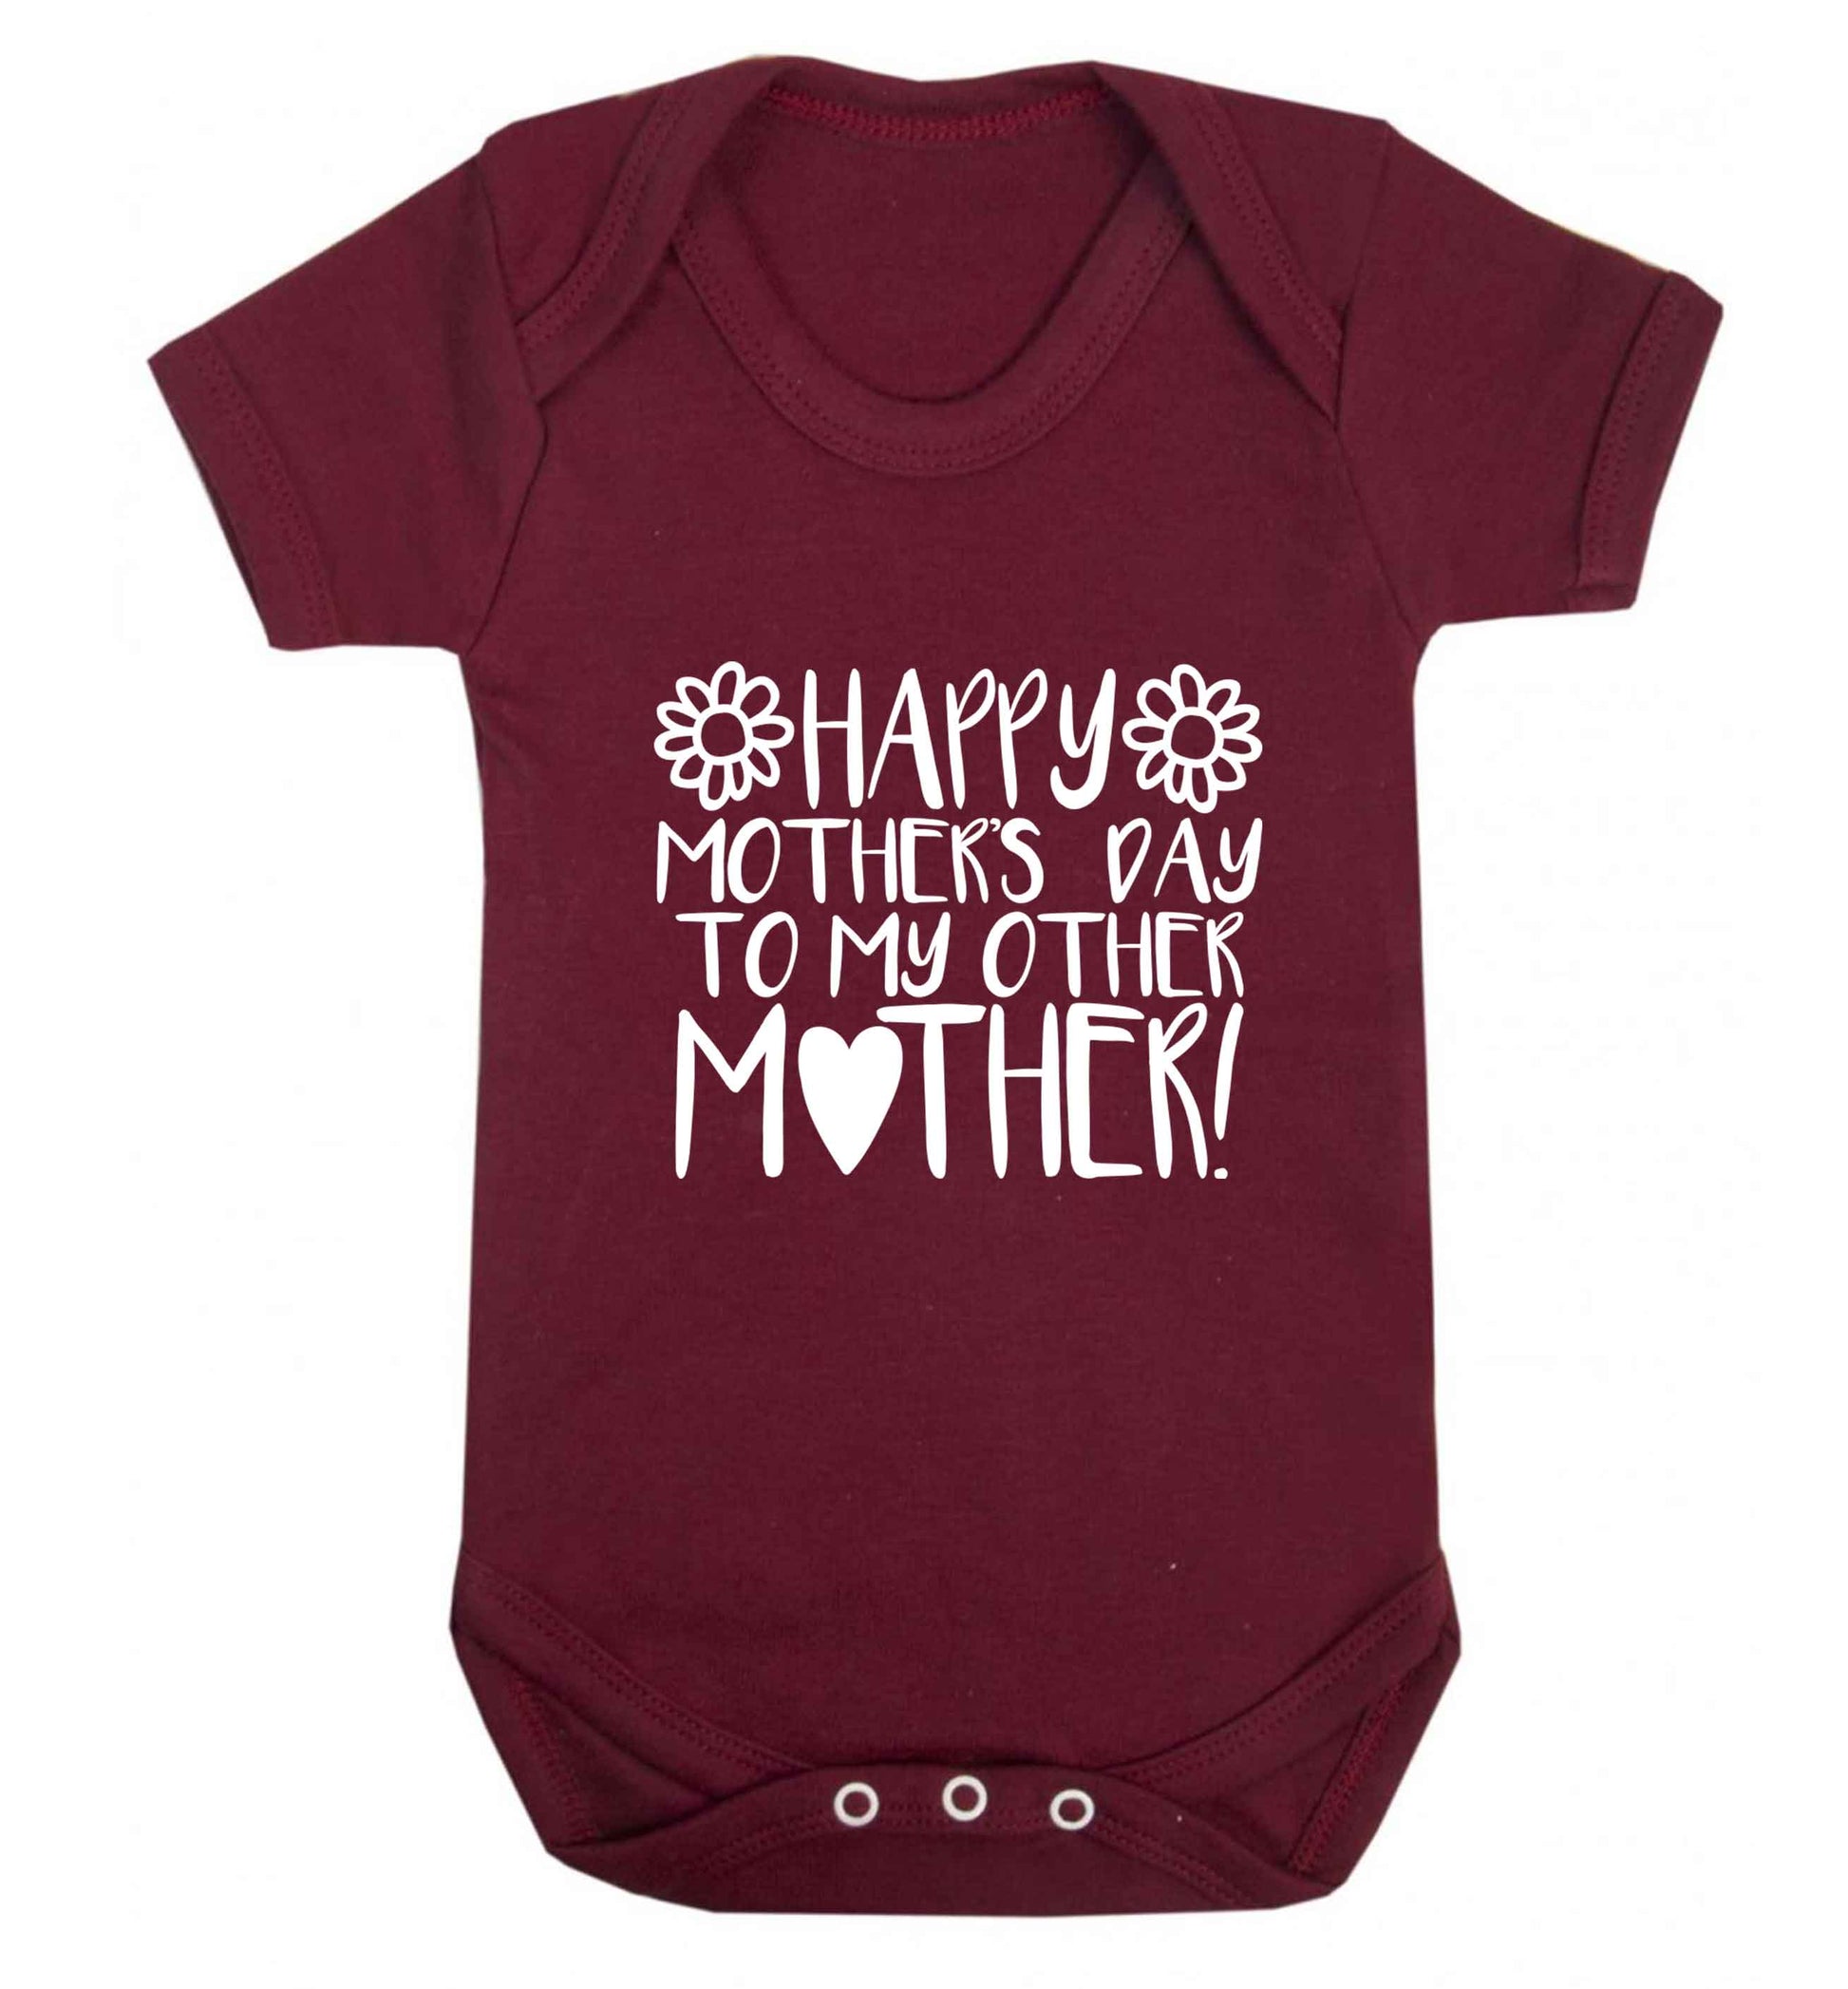 Happy mother's day to my other mother baby vest maroon 18-24 months